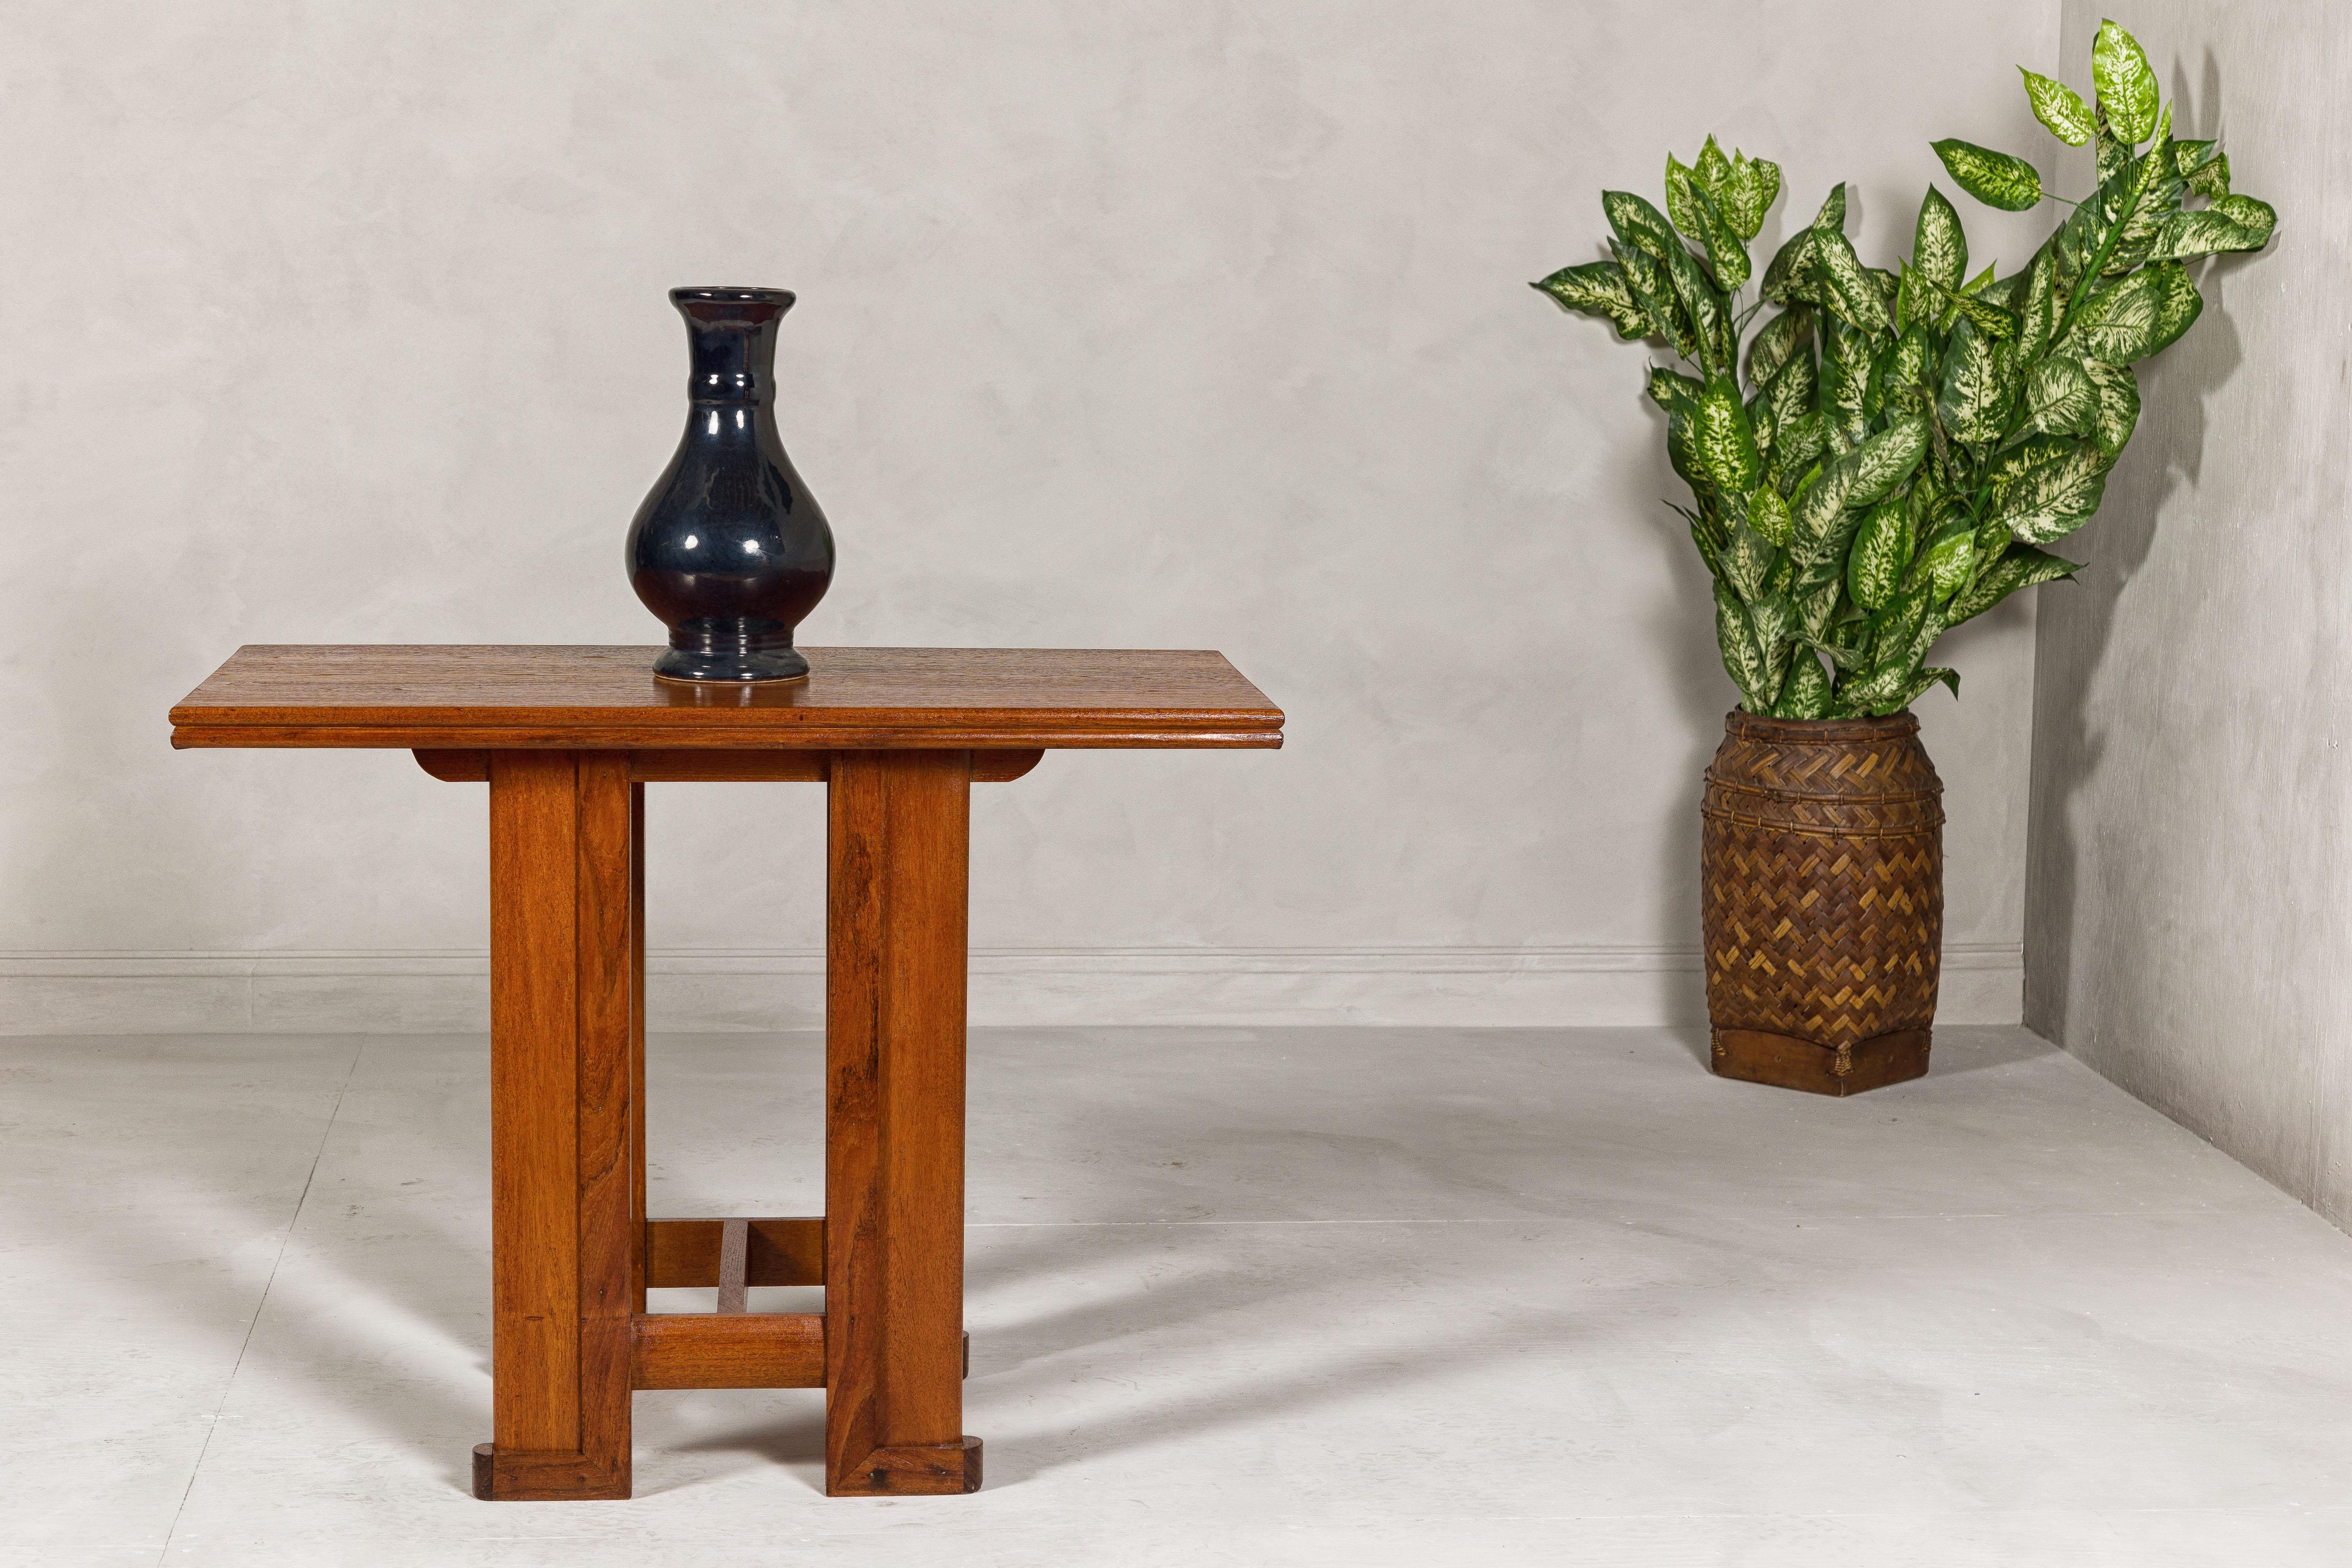 A Midcentury wooden console table with Art Deco inspired base. This midcentury wooden console table, gracefully restored and refinished, offers a nod to Art Deco elegance with its linear base. The table's streamlined design and brown surface reflect